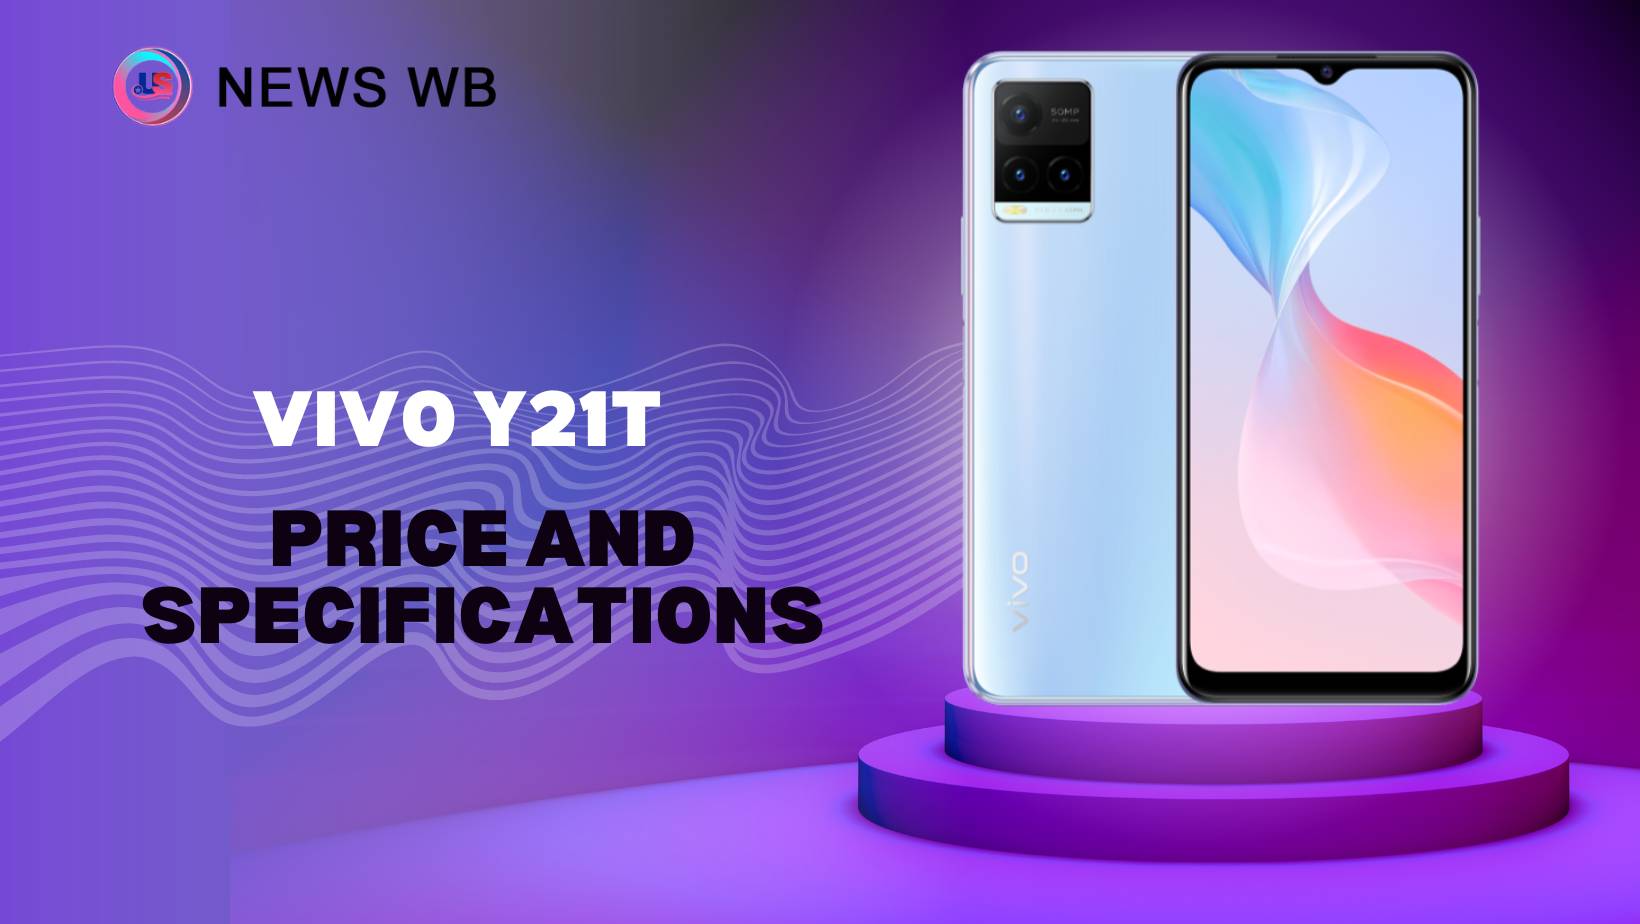 Vivo Y21t Price and Specifications